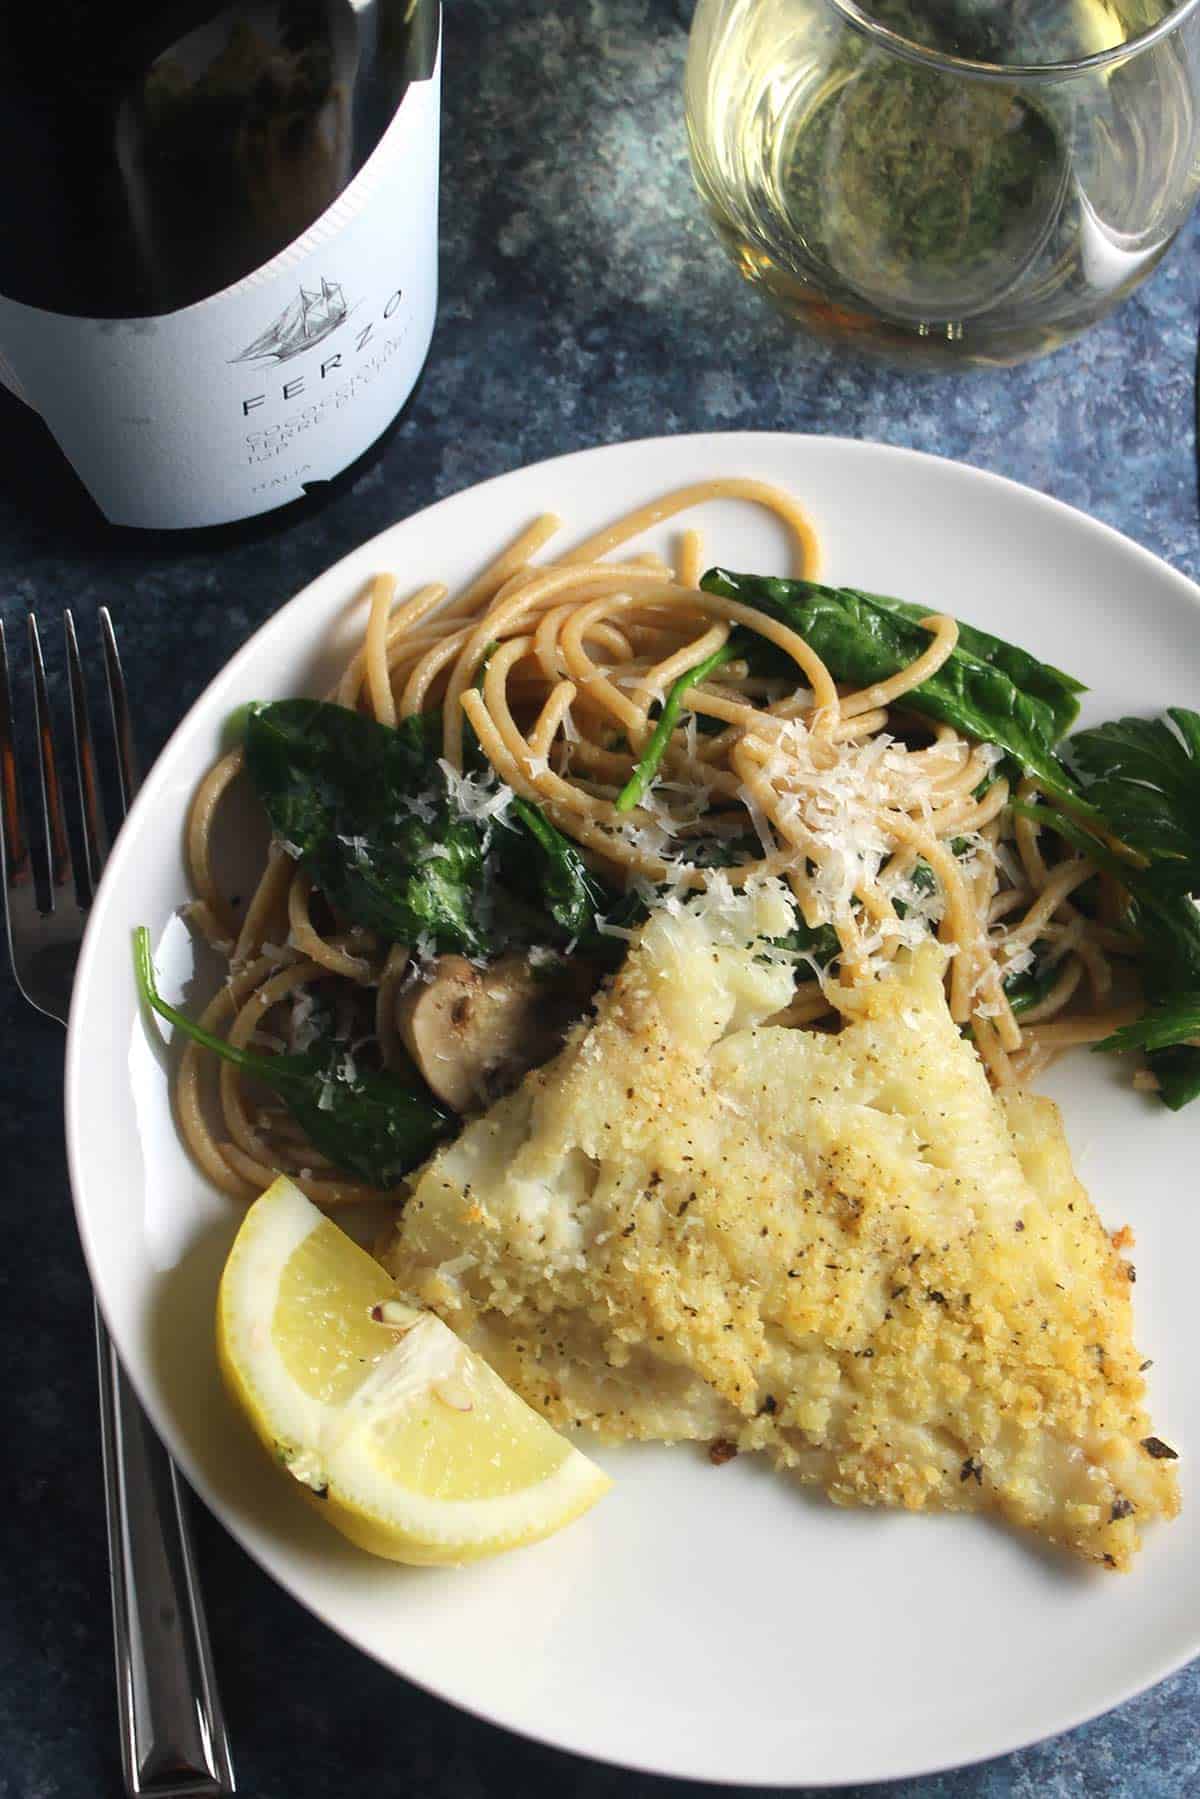 a plate of baked haddock with pasta along with glass of white wine.